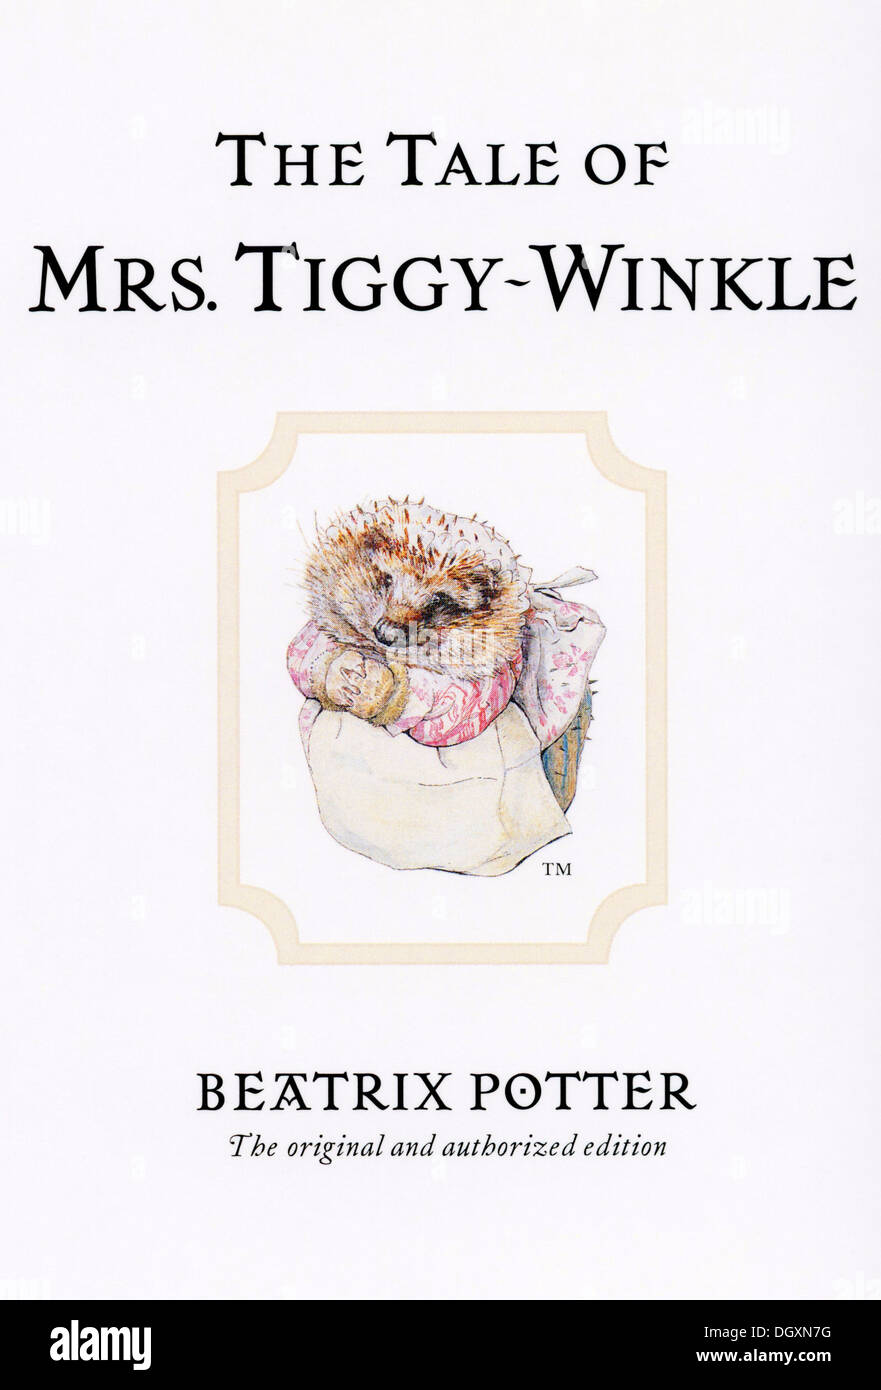 Beatrix Potter - The Tale of Mrs. Twiggy-Winkle book cover, 1905 Stock Photo